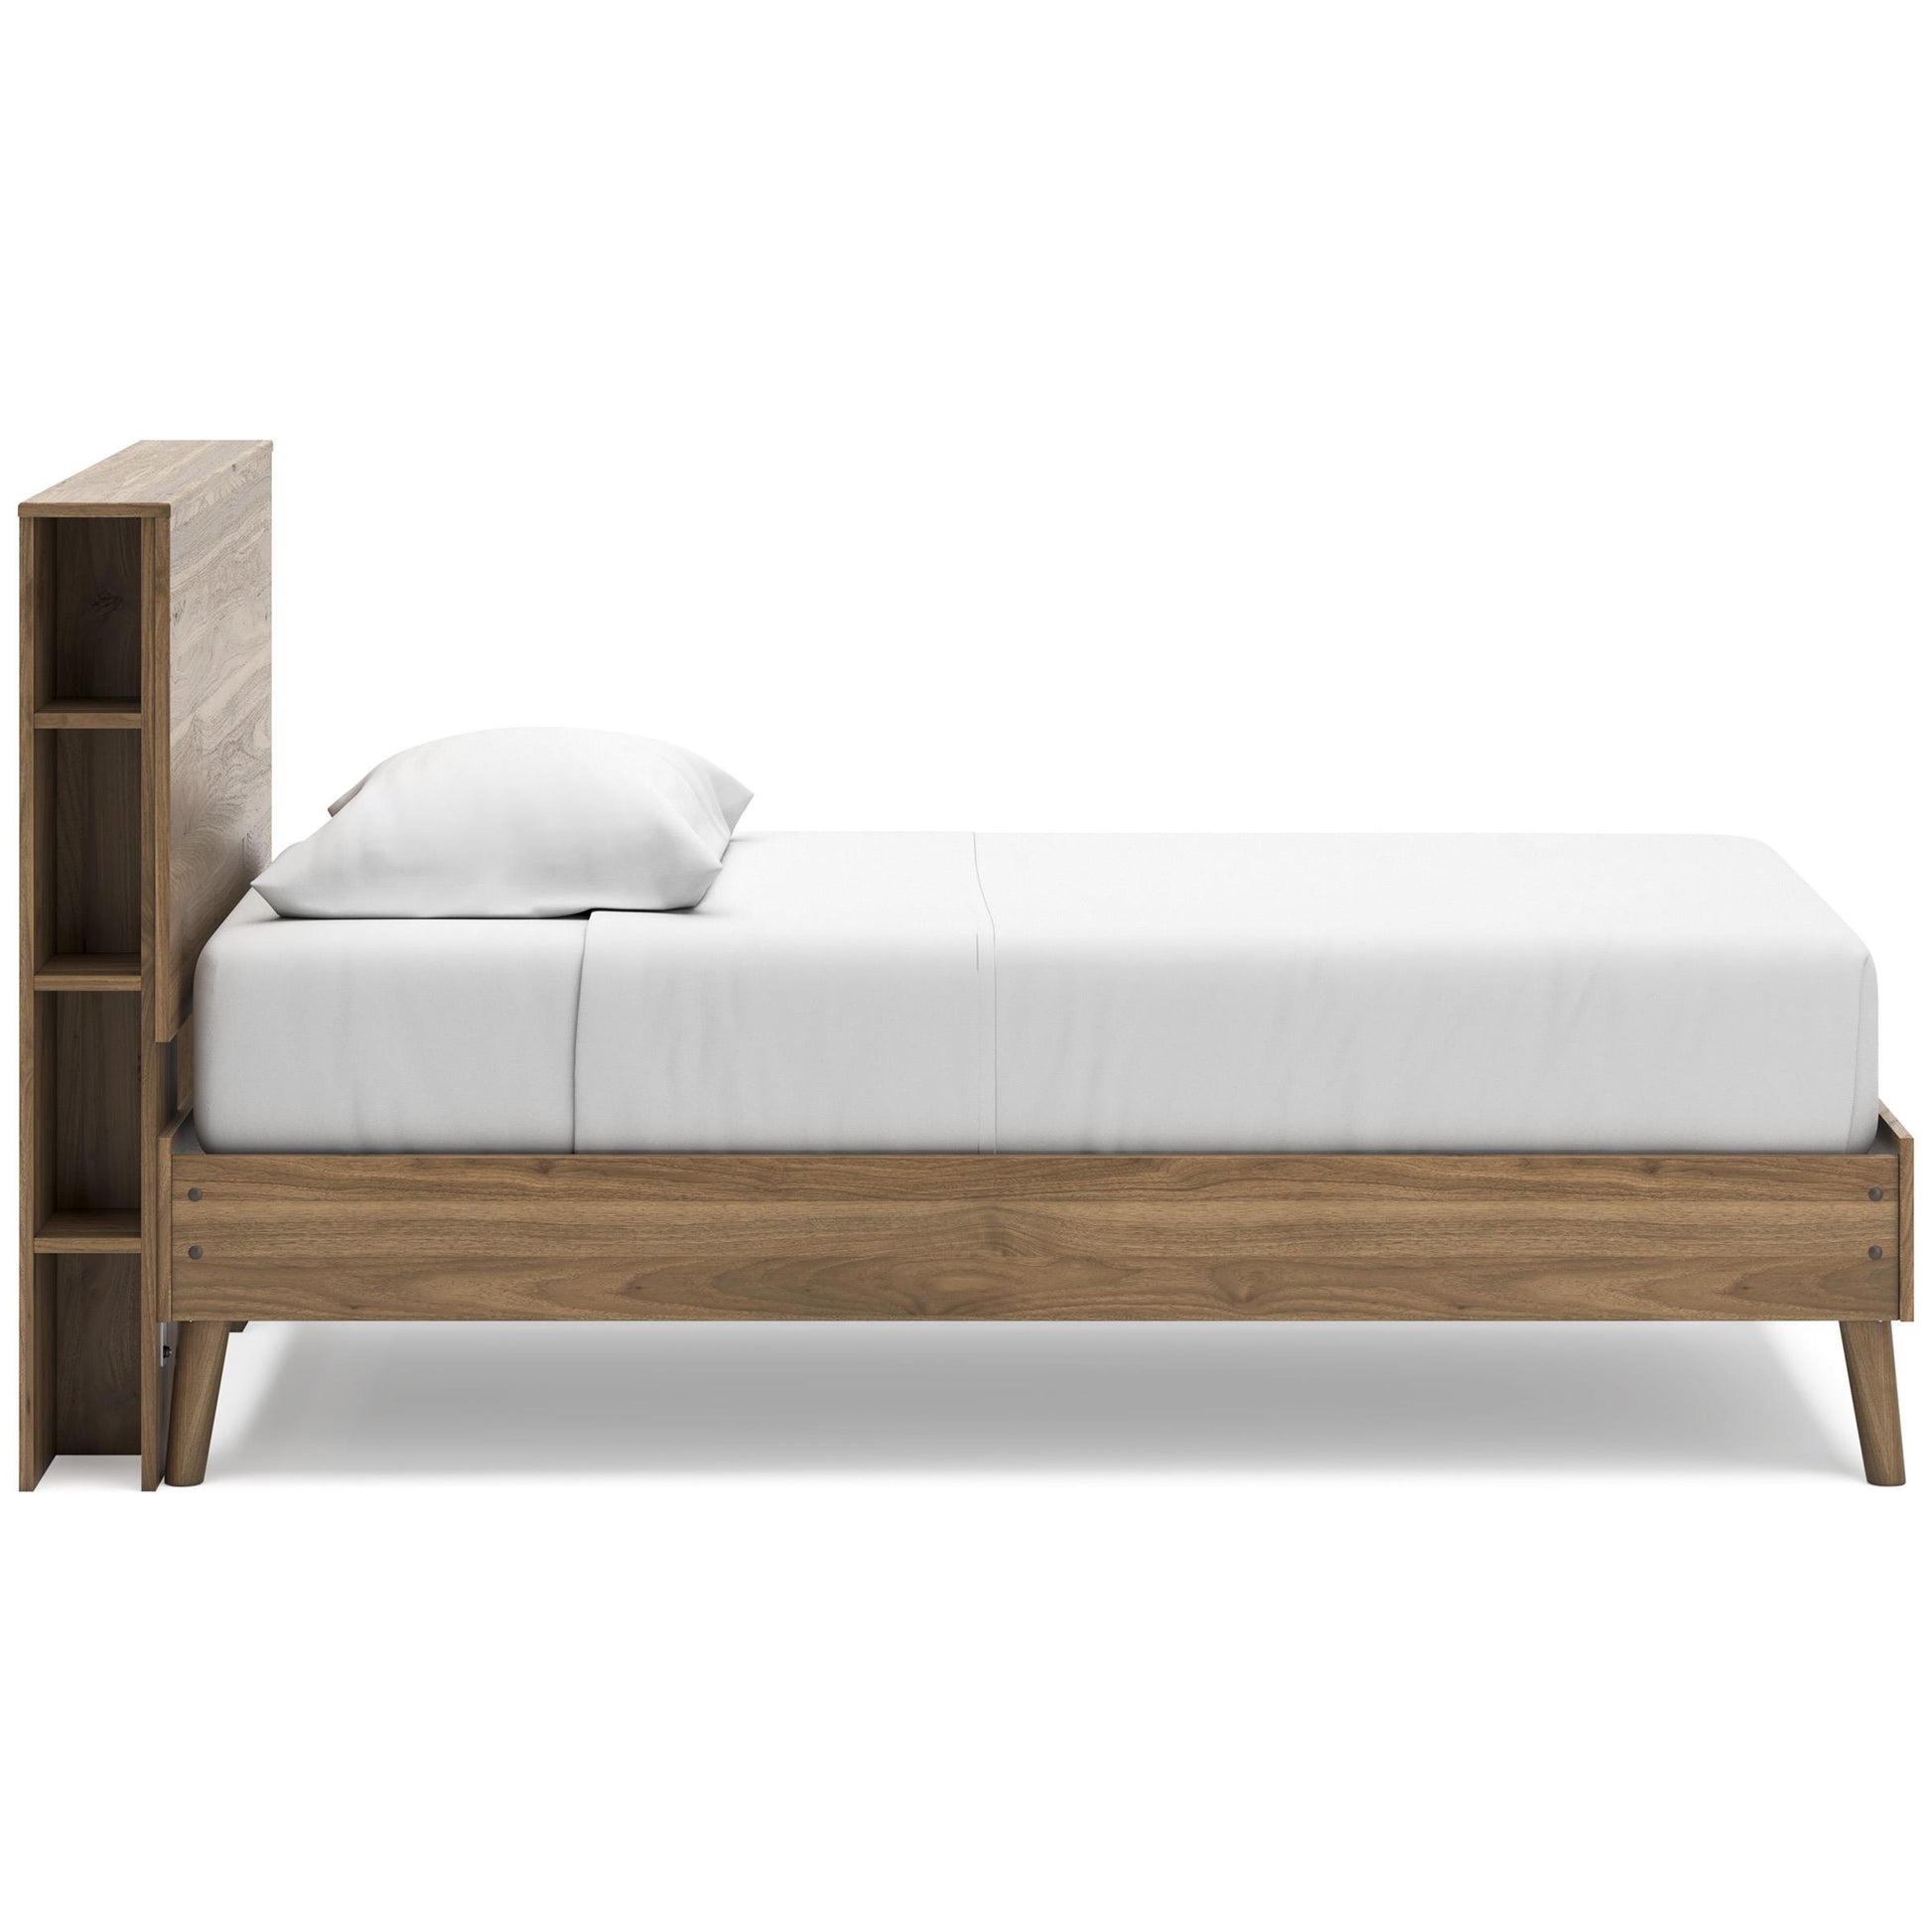 Signature Design by Ashley Kids Beds Bed EB1187-163/EB1187-111 IMAGE 3